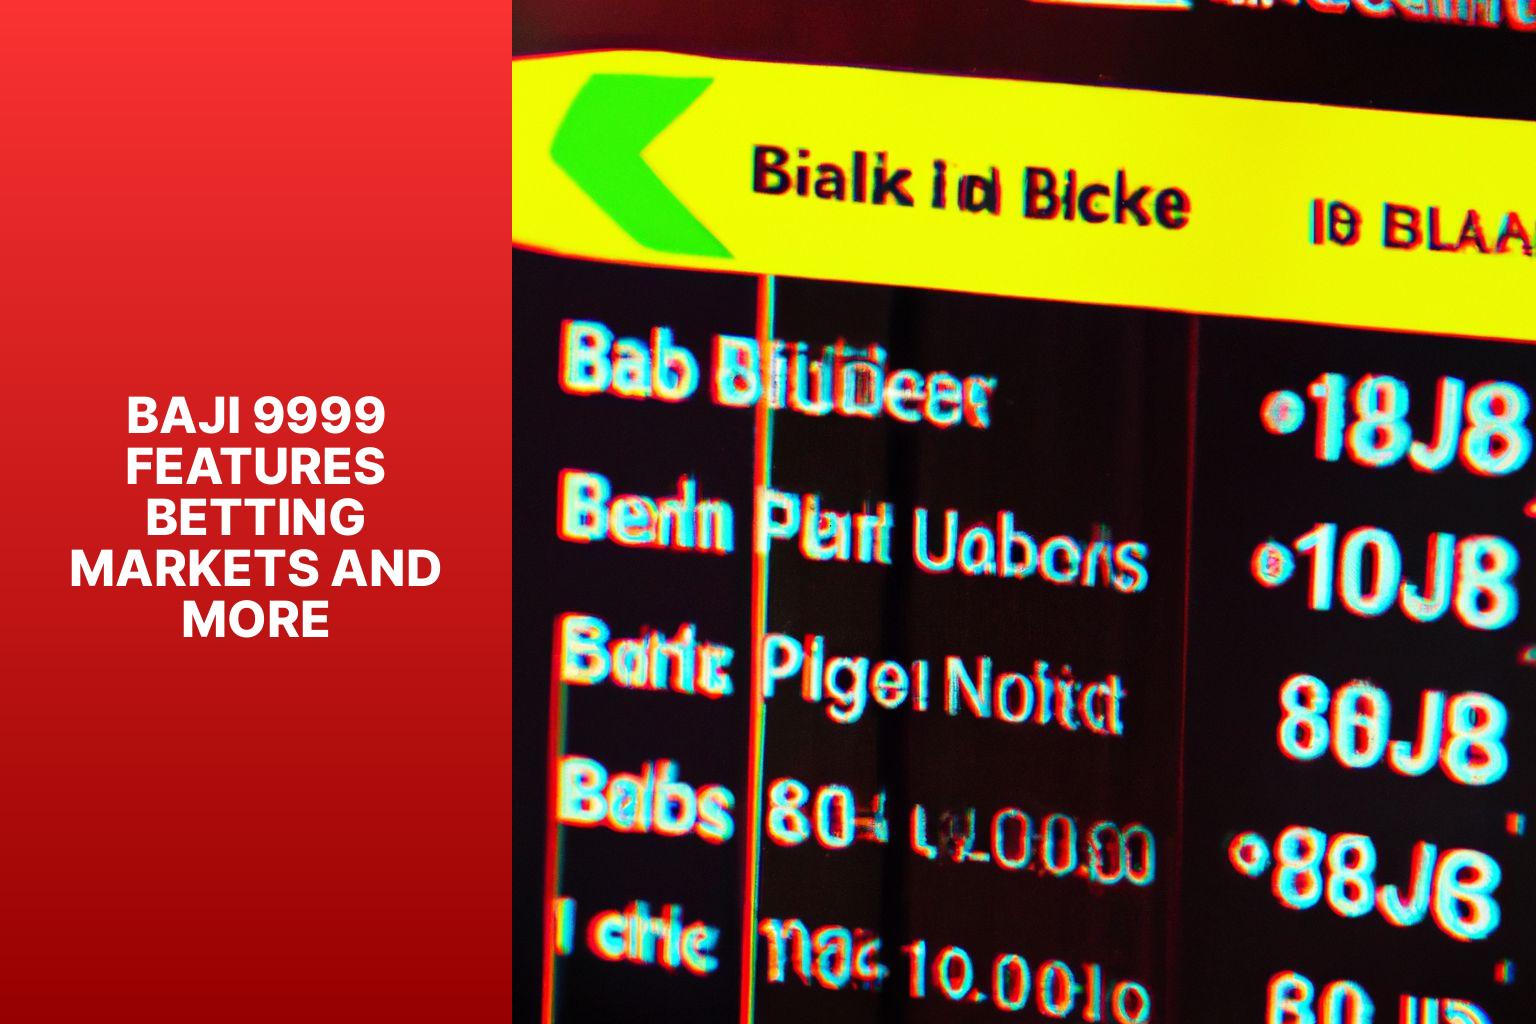 Baji 9999 Features Betting Markets and More